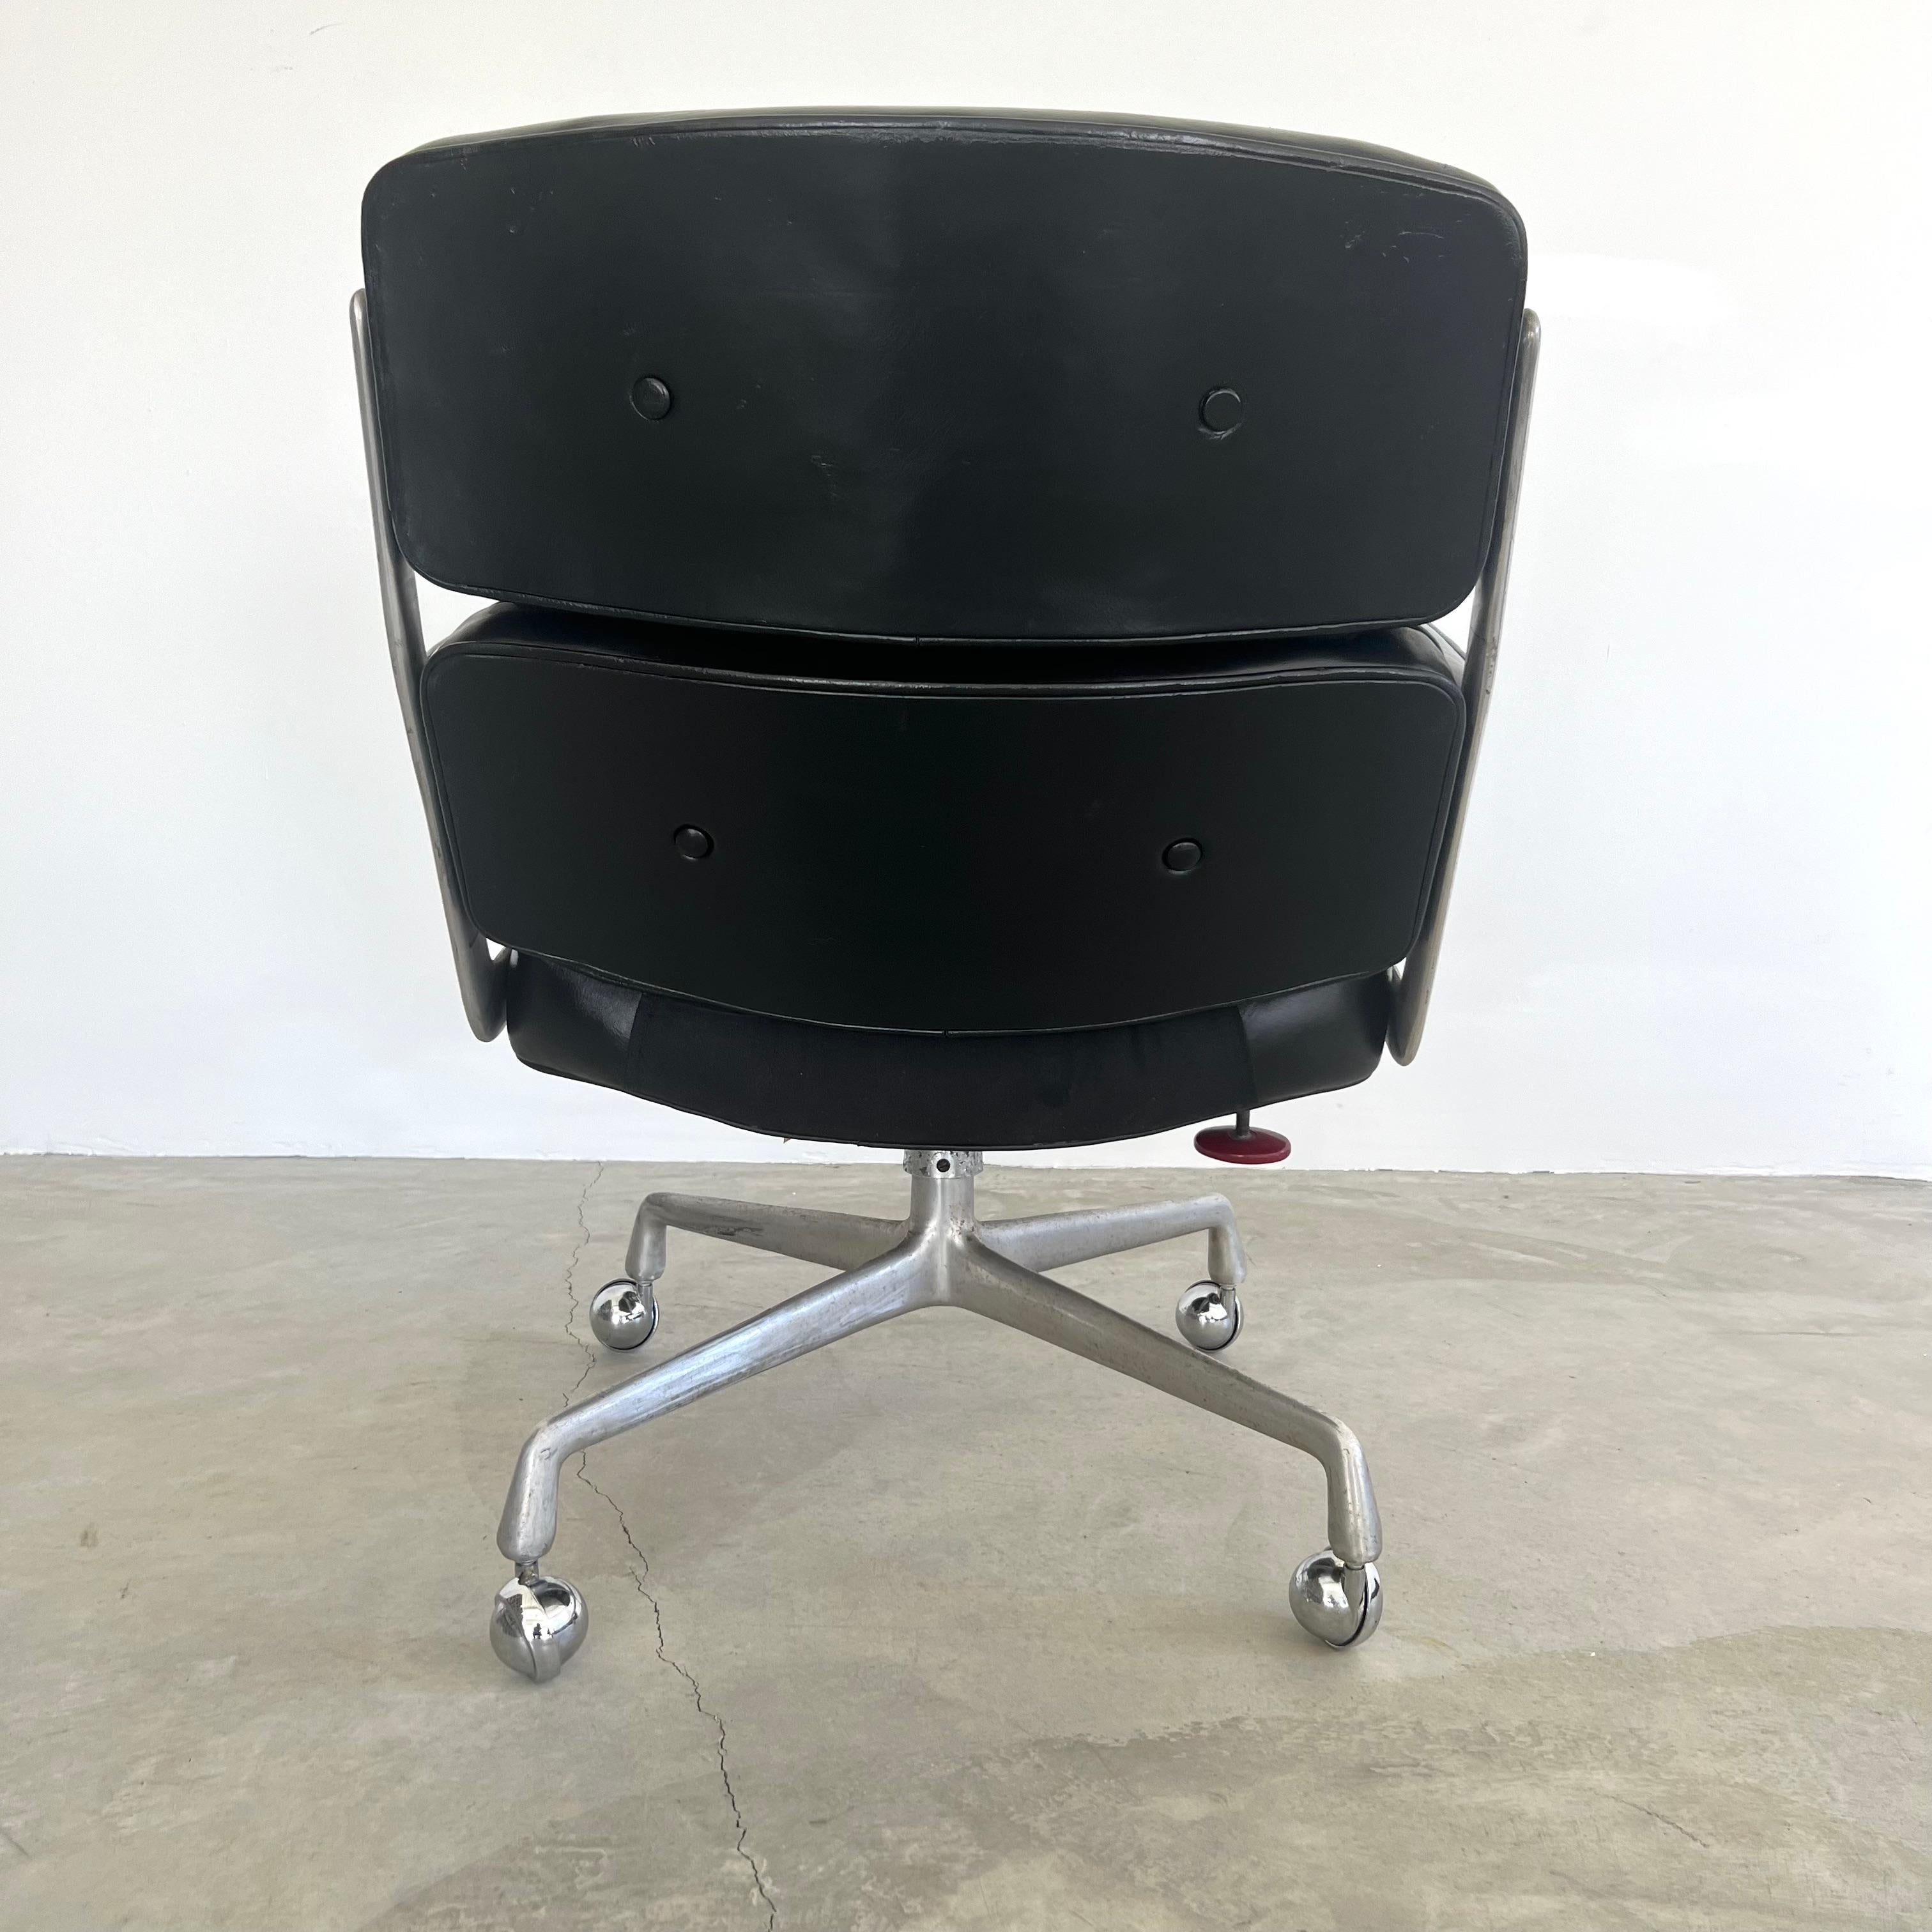 Aluminum Eames Time Life Chair in Black Leather for Herman Miller, 1980s USA For Sale